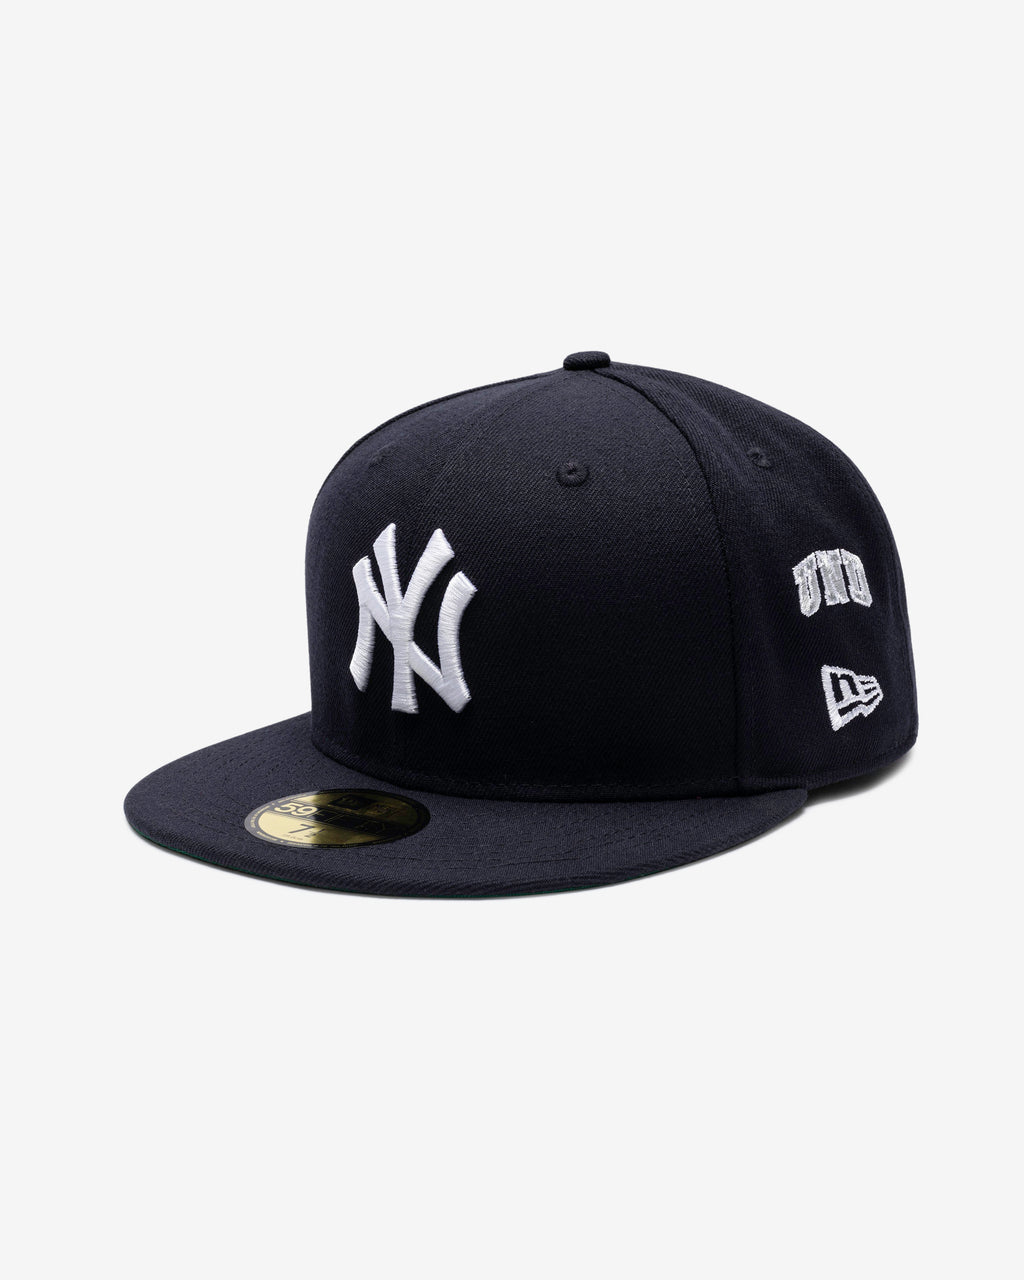 UNDEFEATED X NE X MLB FITTED - NEW YORK YANKEES